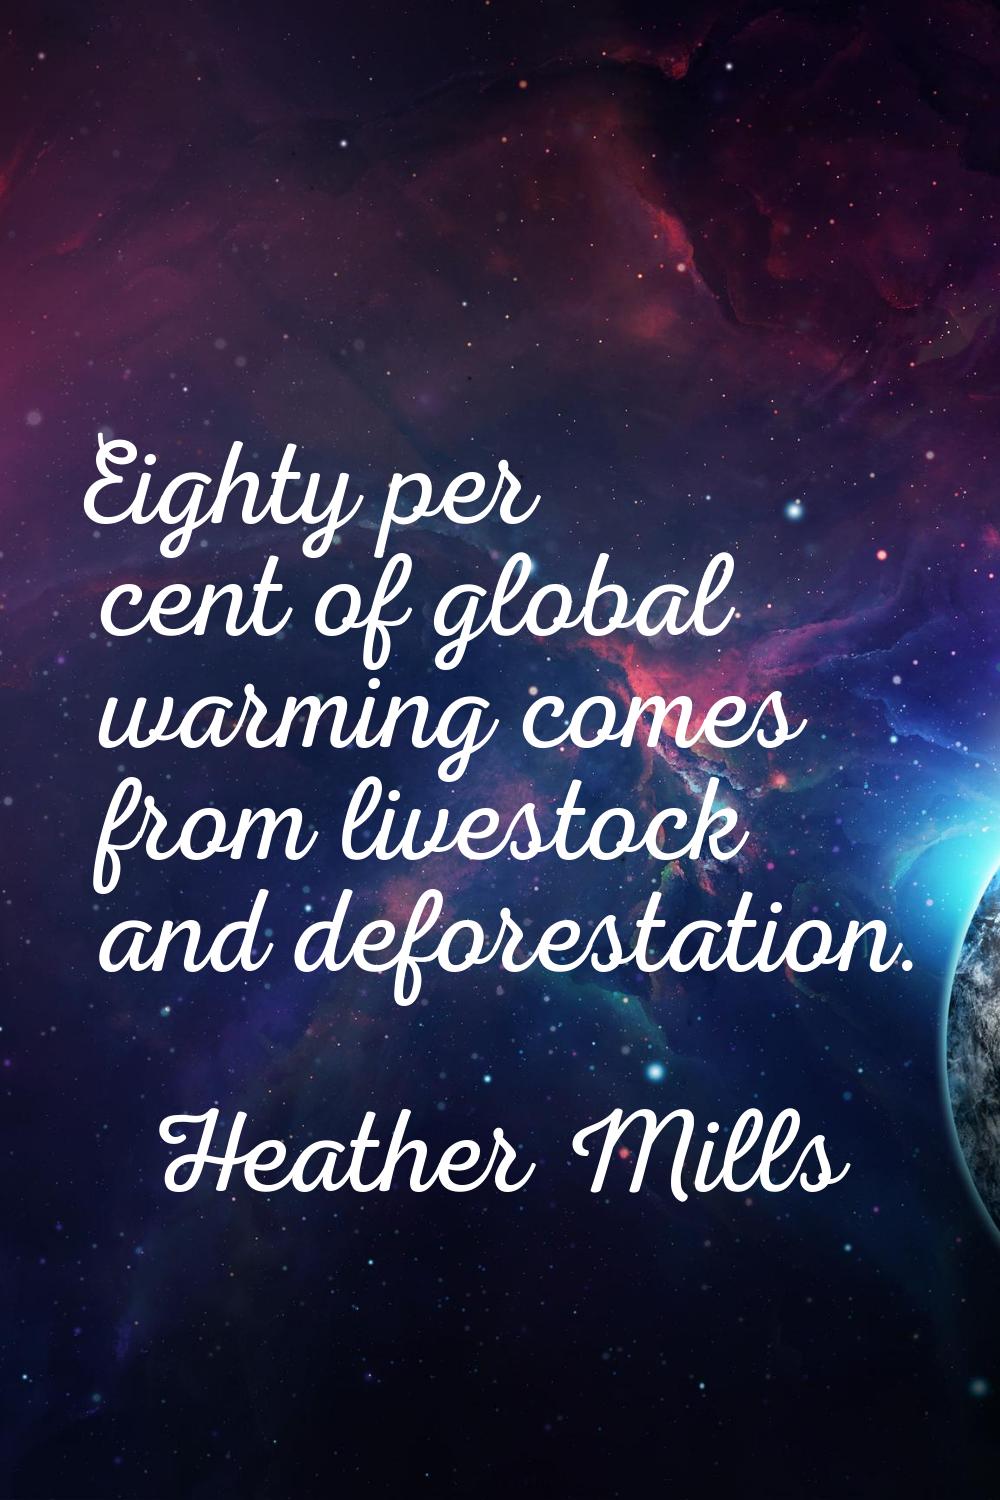 Eighty per cent of global warming comes from livestock and deforestation.